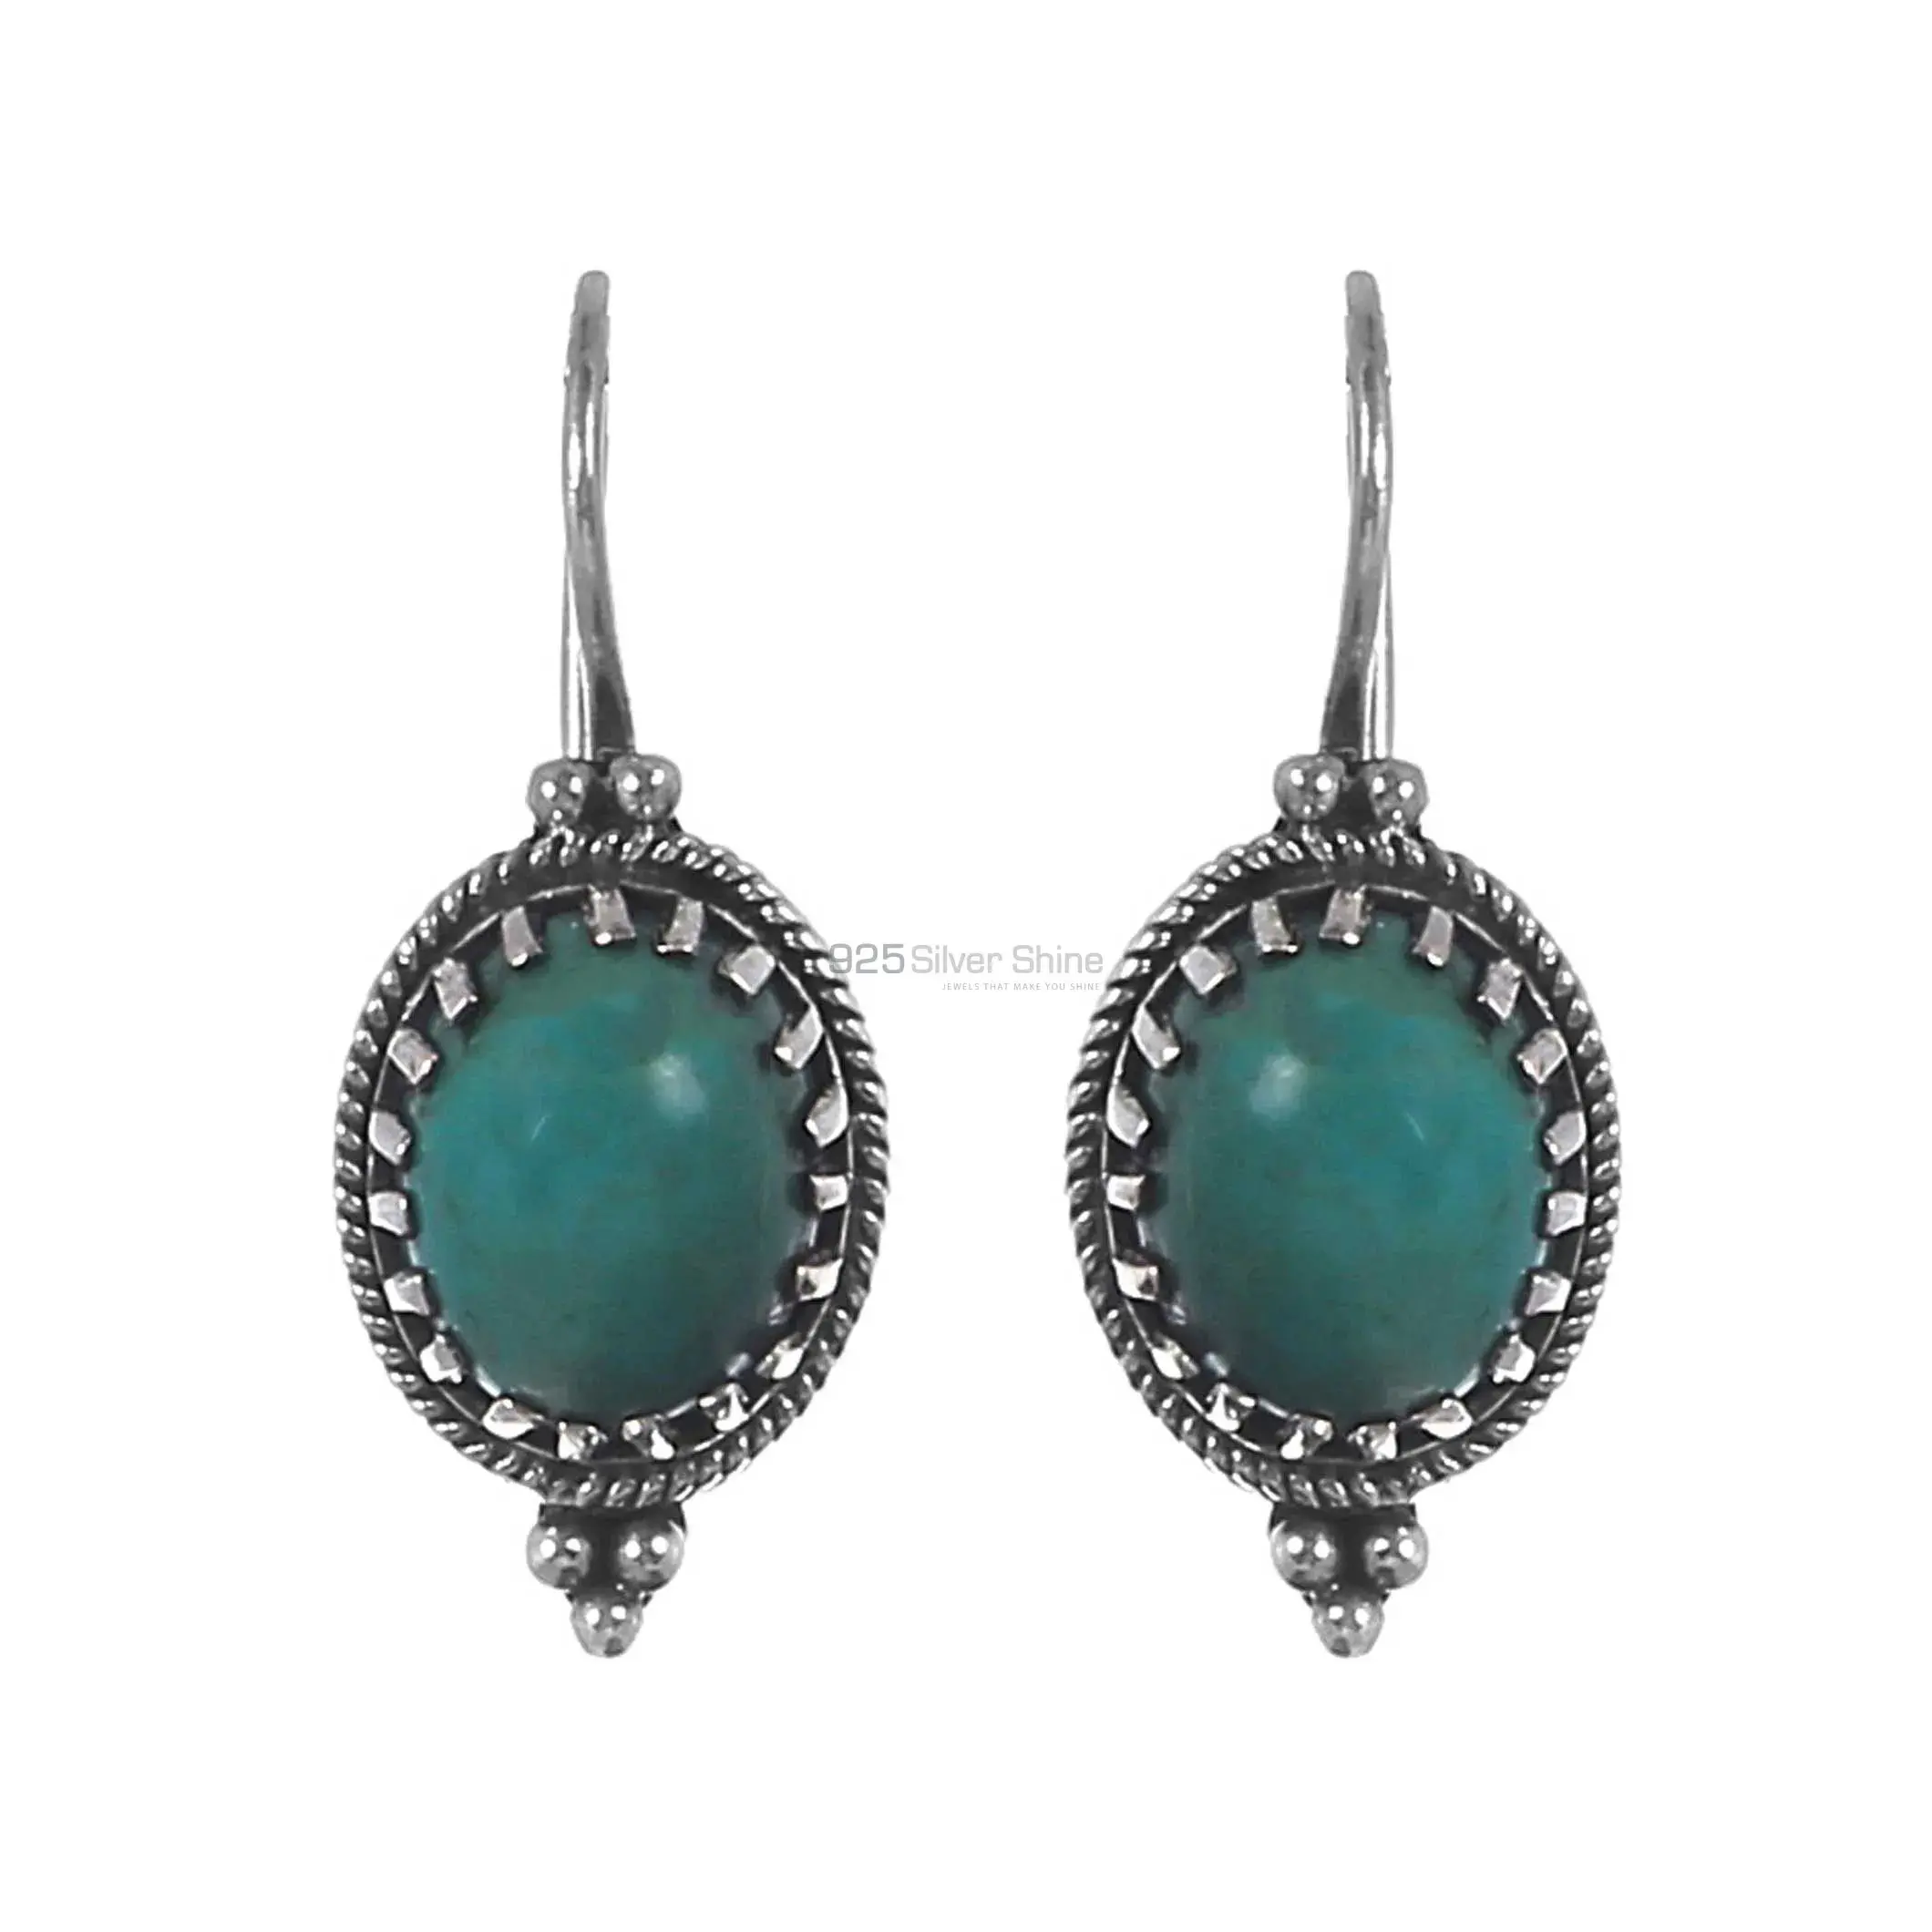 Cabochon Turquoise Gemstone Earring In Sterling Silver Jewelry 925SE193